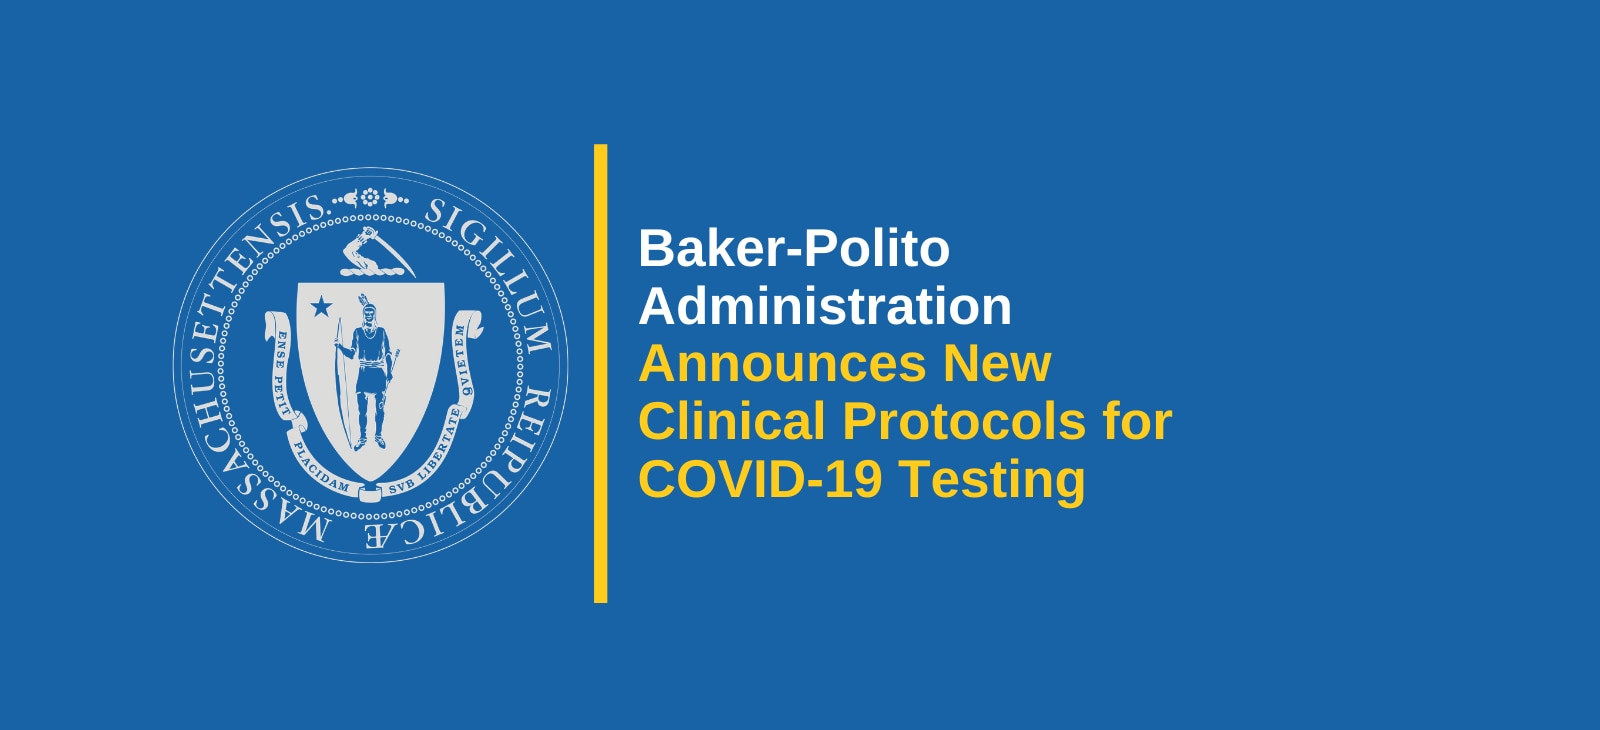 Baker-Polito Administration Announces New Clinical Protocols for COVID-19 Testing